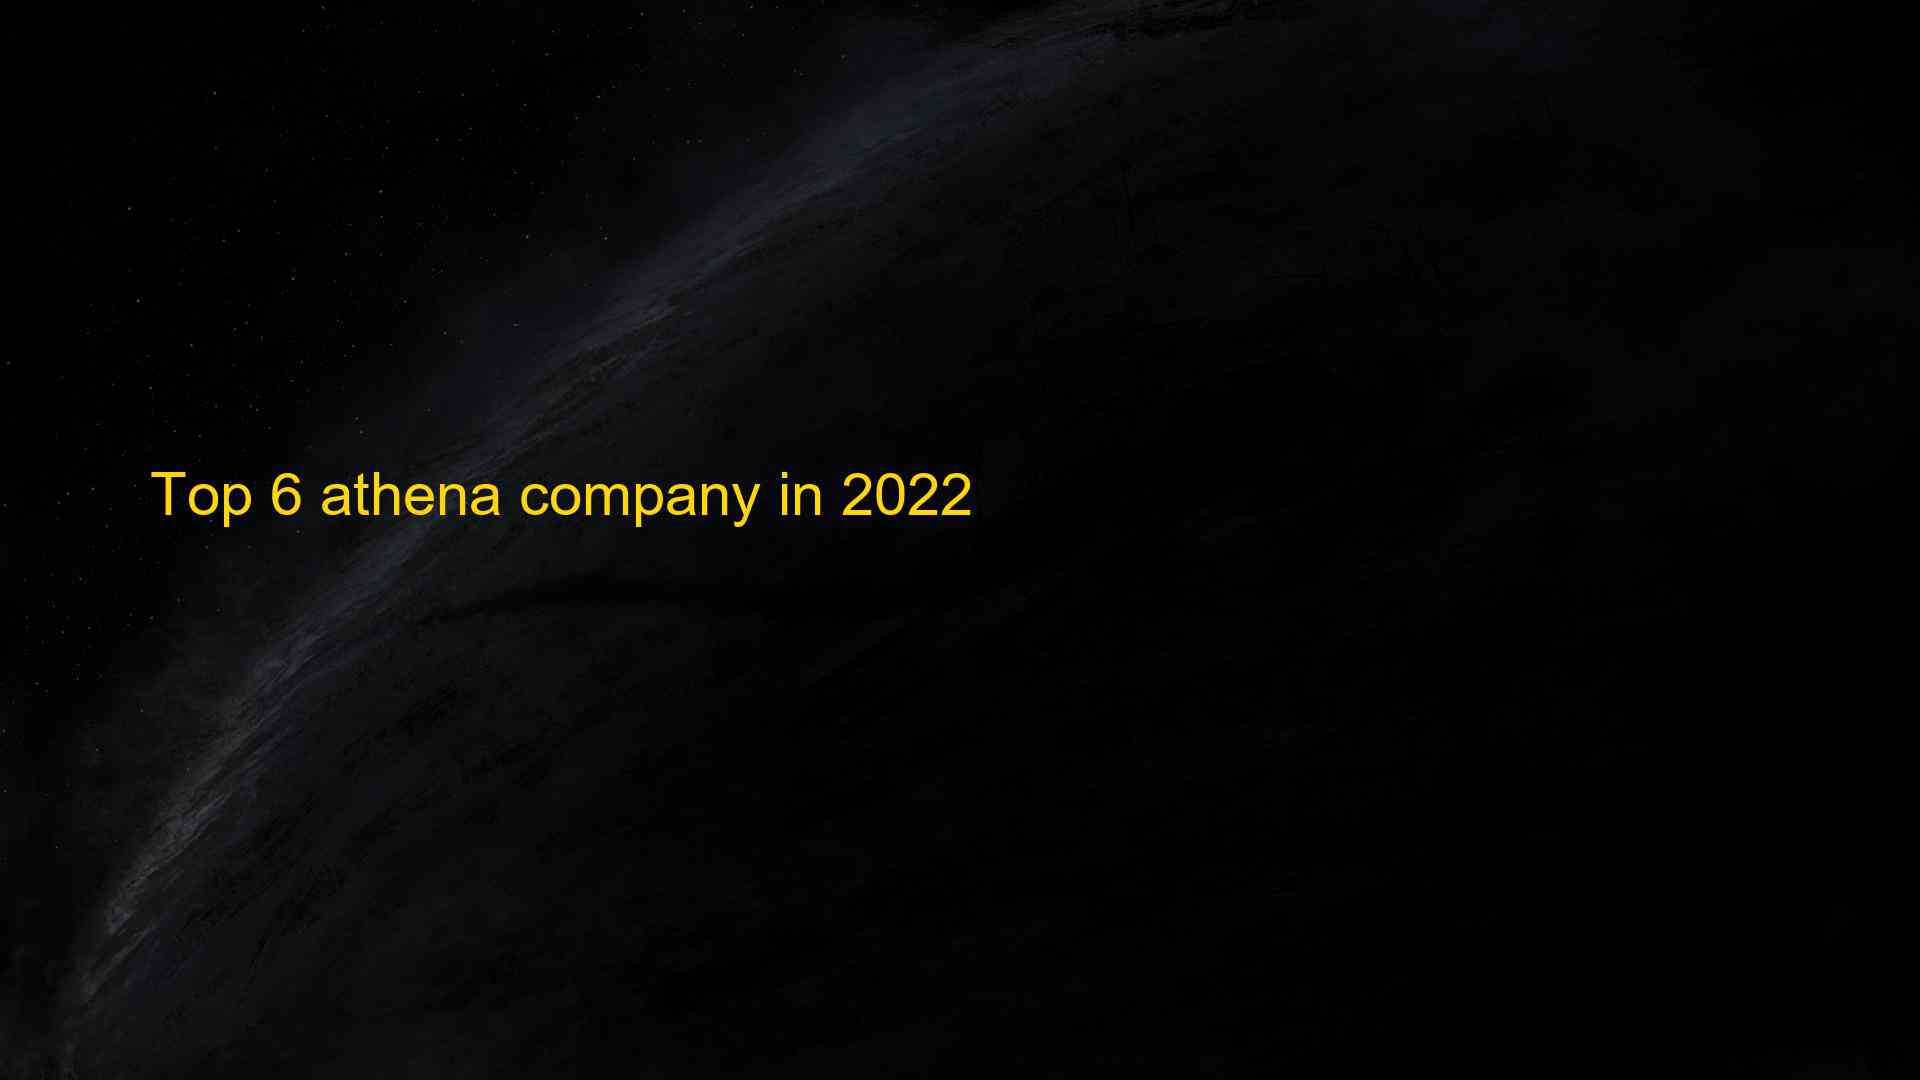 Top 6 athena company in 2022 1660114040